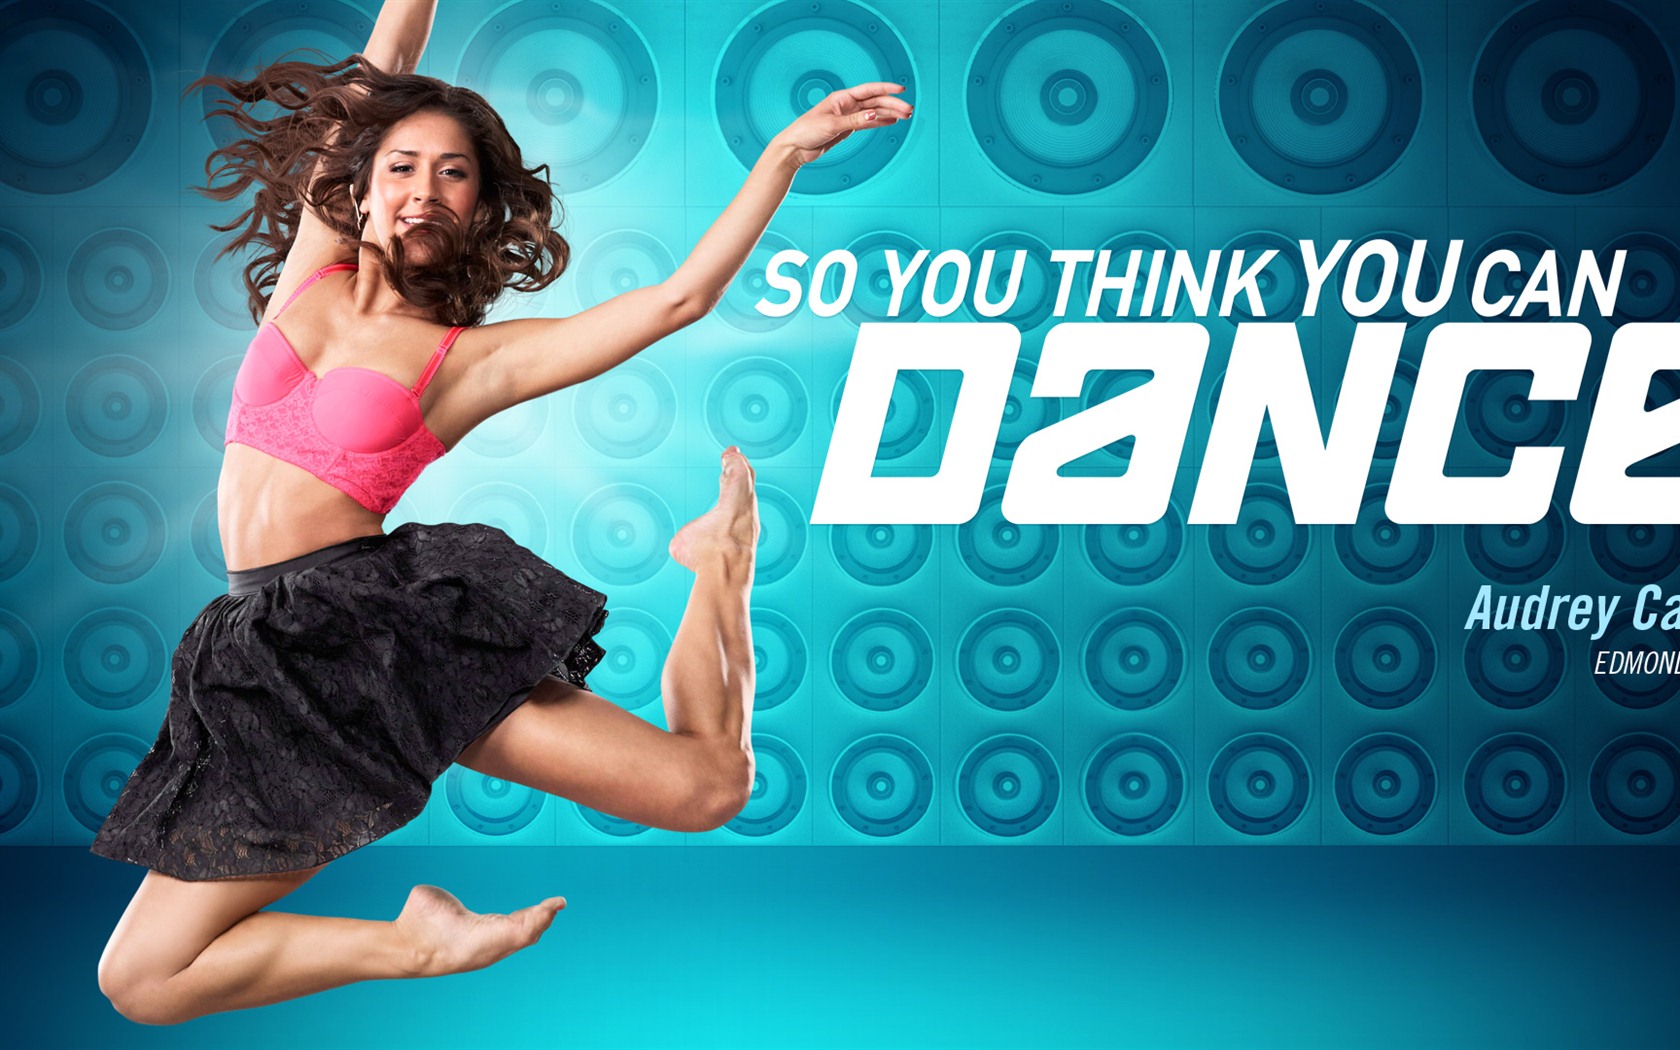 So You Think You Can Dance 舞林争霸 2012高清壁纸5 - 1680x1050